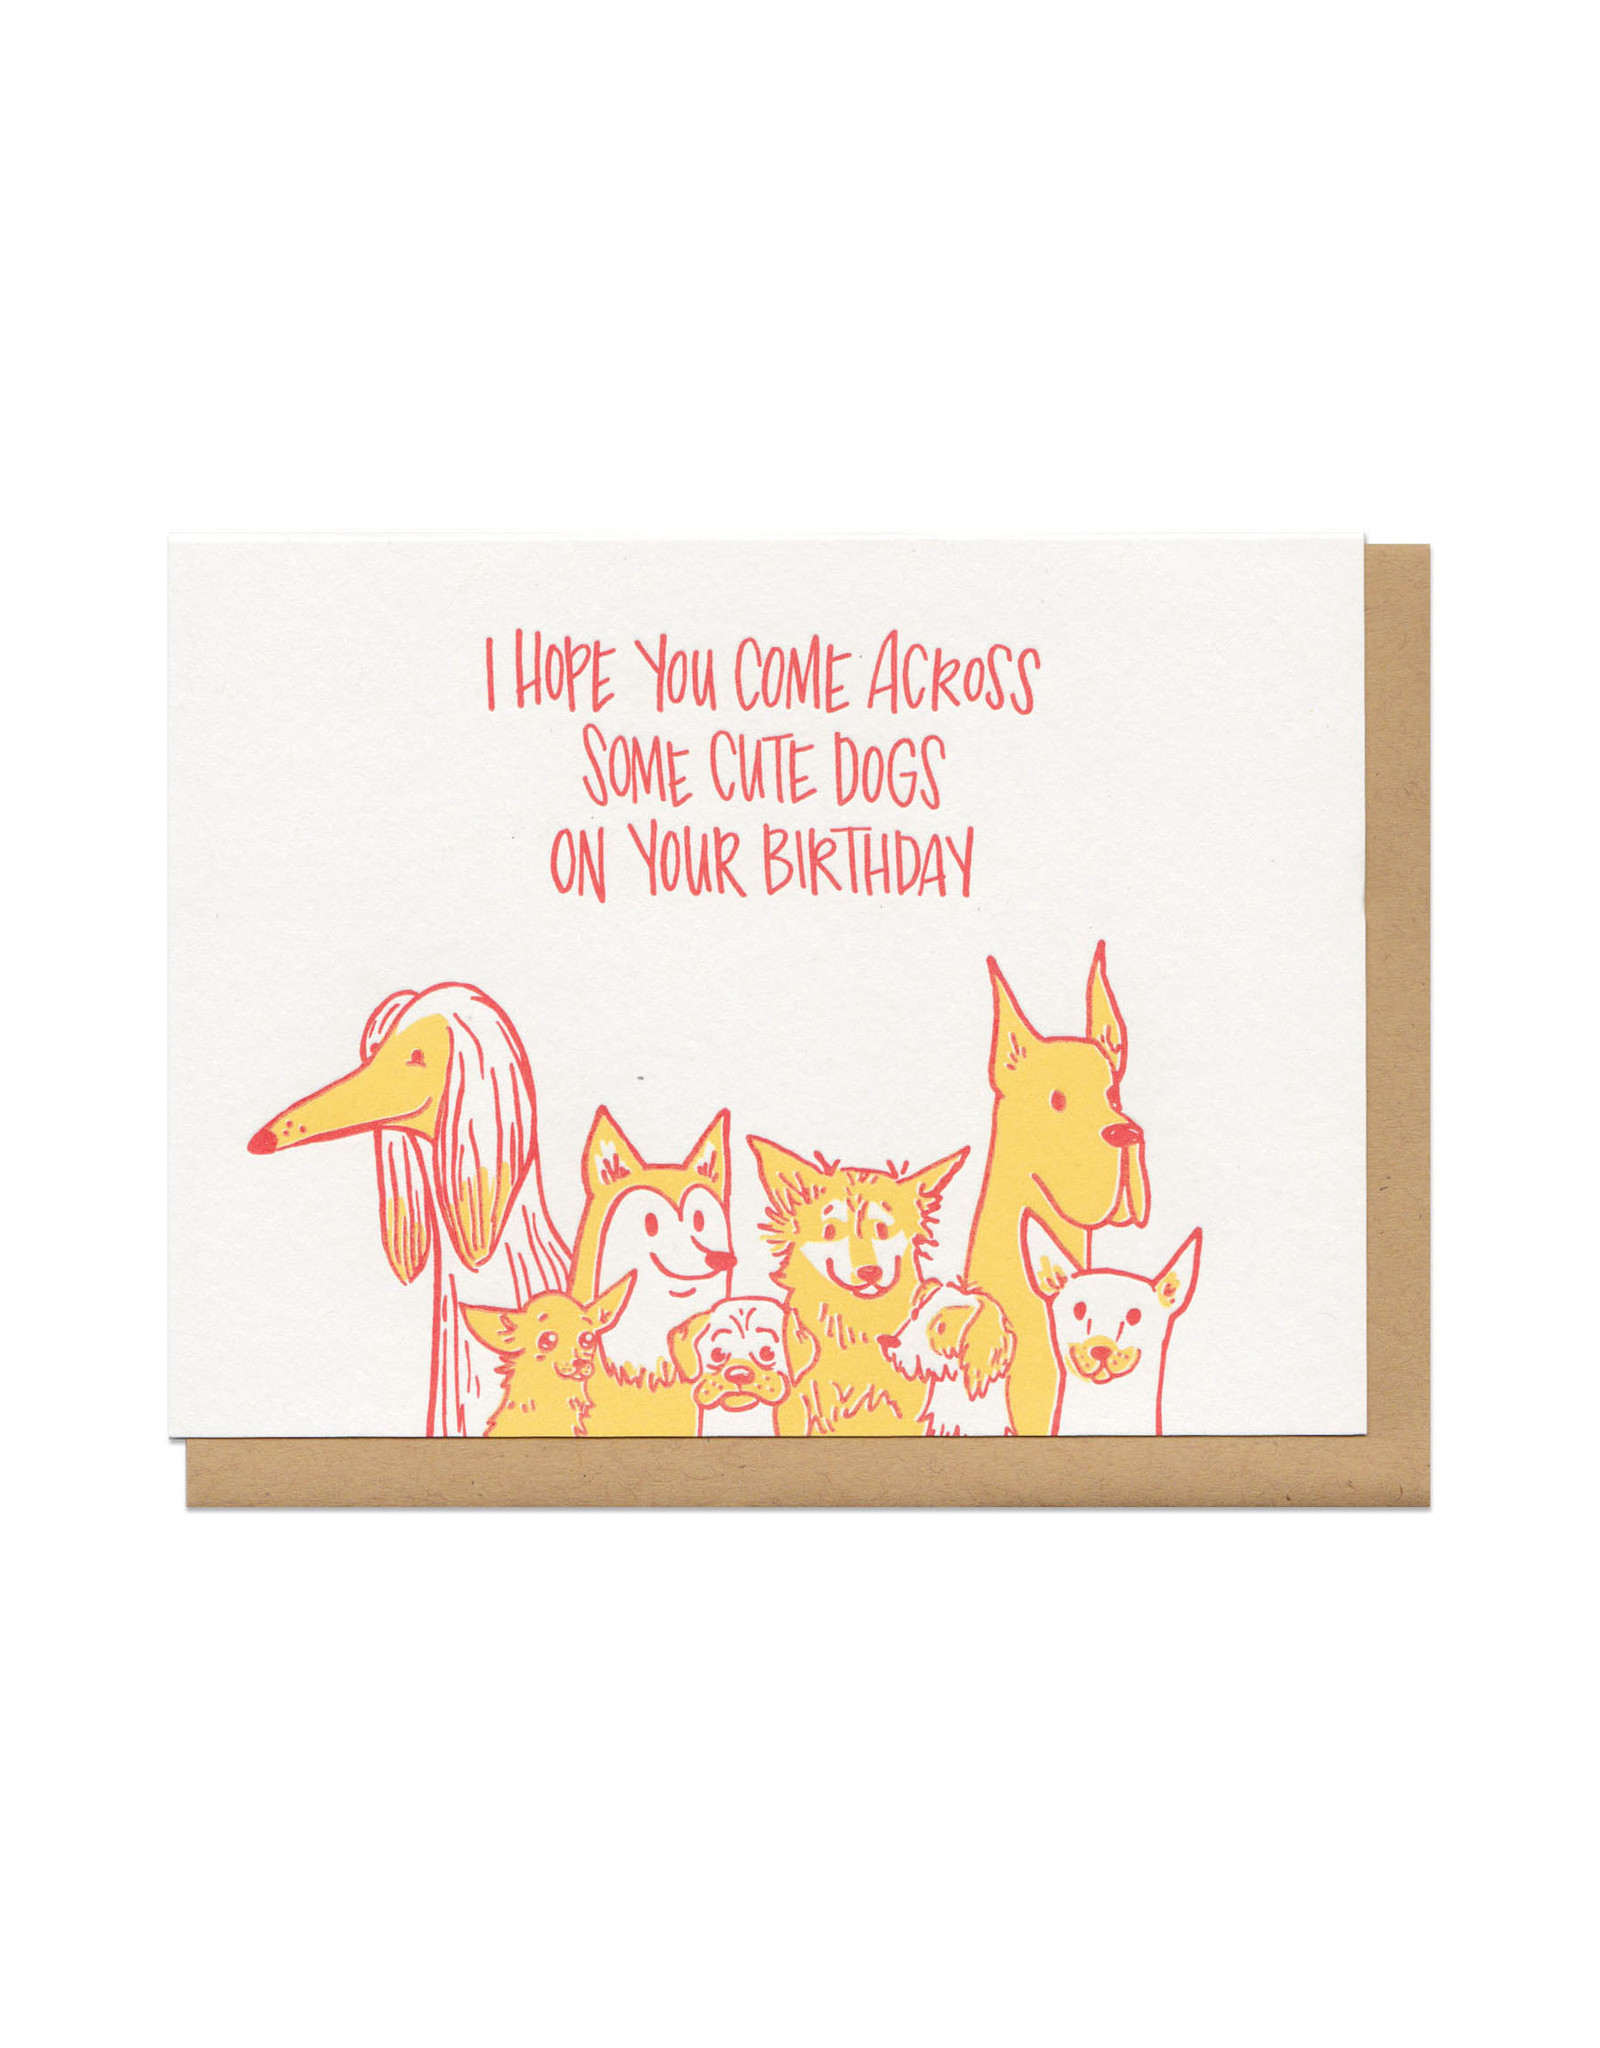 I Hope You Come Across Some Cute Dogs on Your Birthday Greeting Card